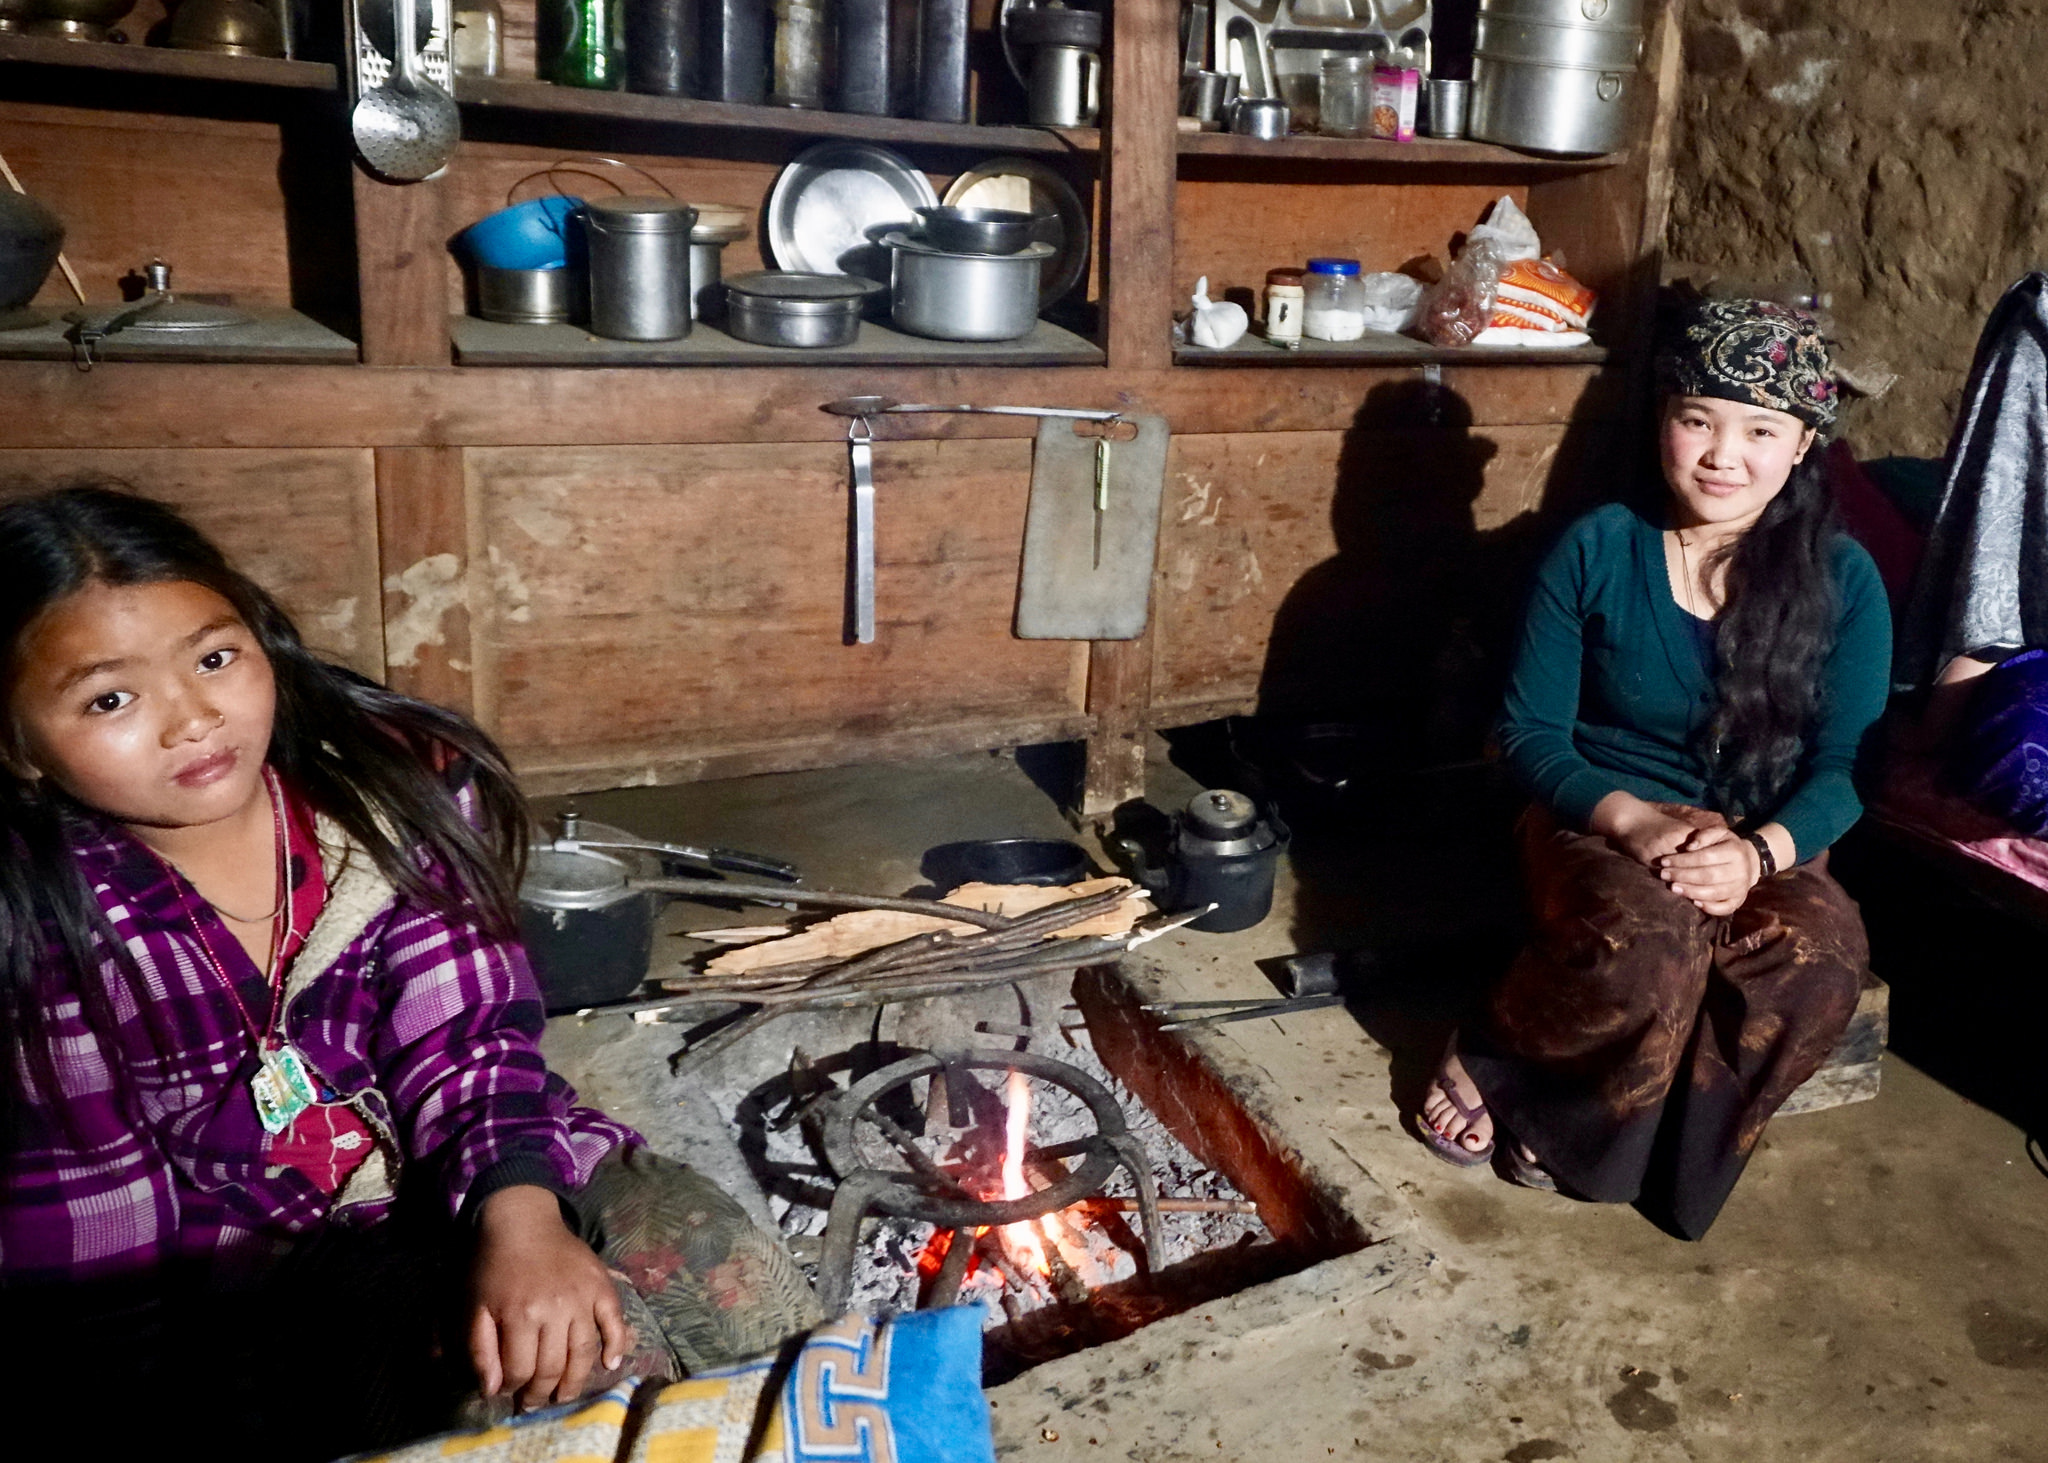 Two women sit next to an indoor cookstove